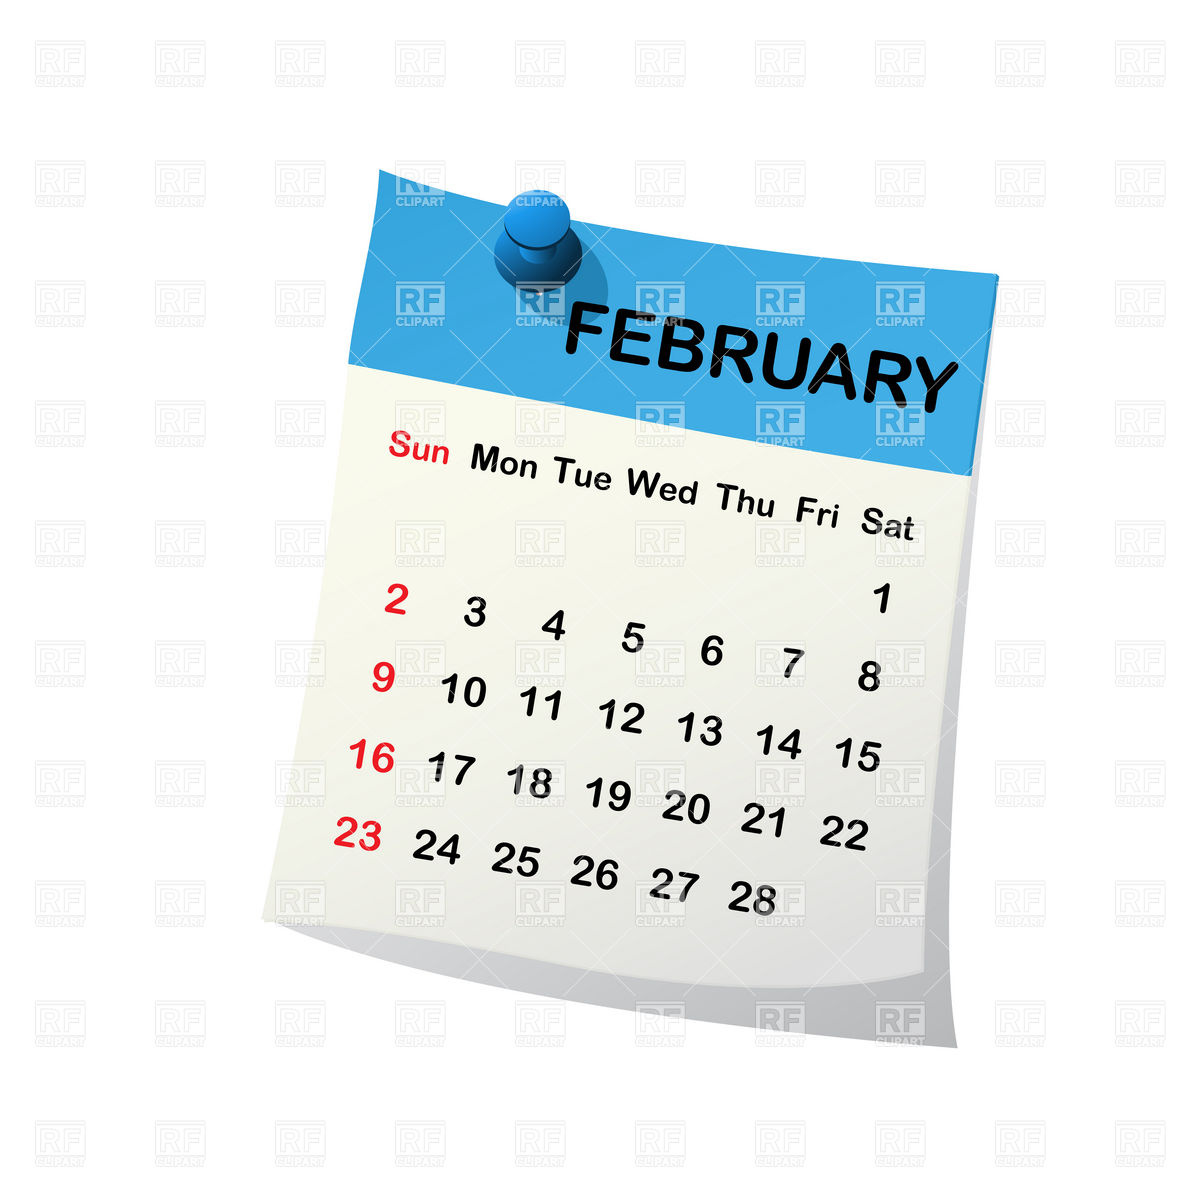 February 2014 Month Calendar Download Royalty Free Vector Clipart